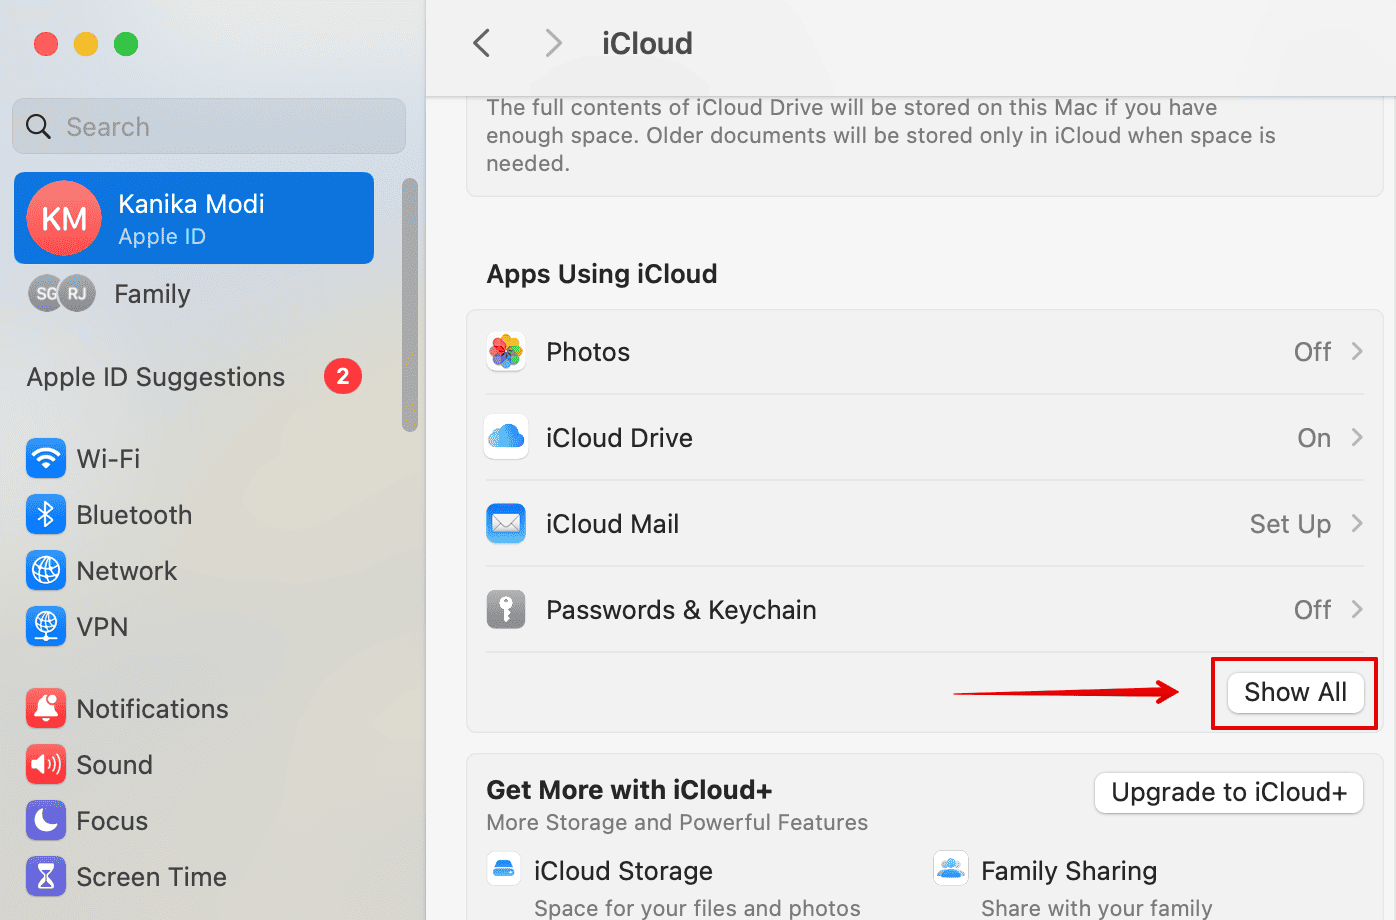 Select Show All under iCloud